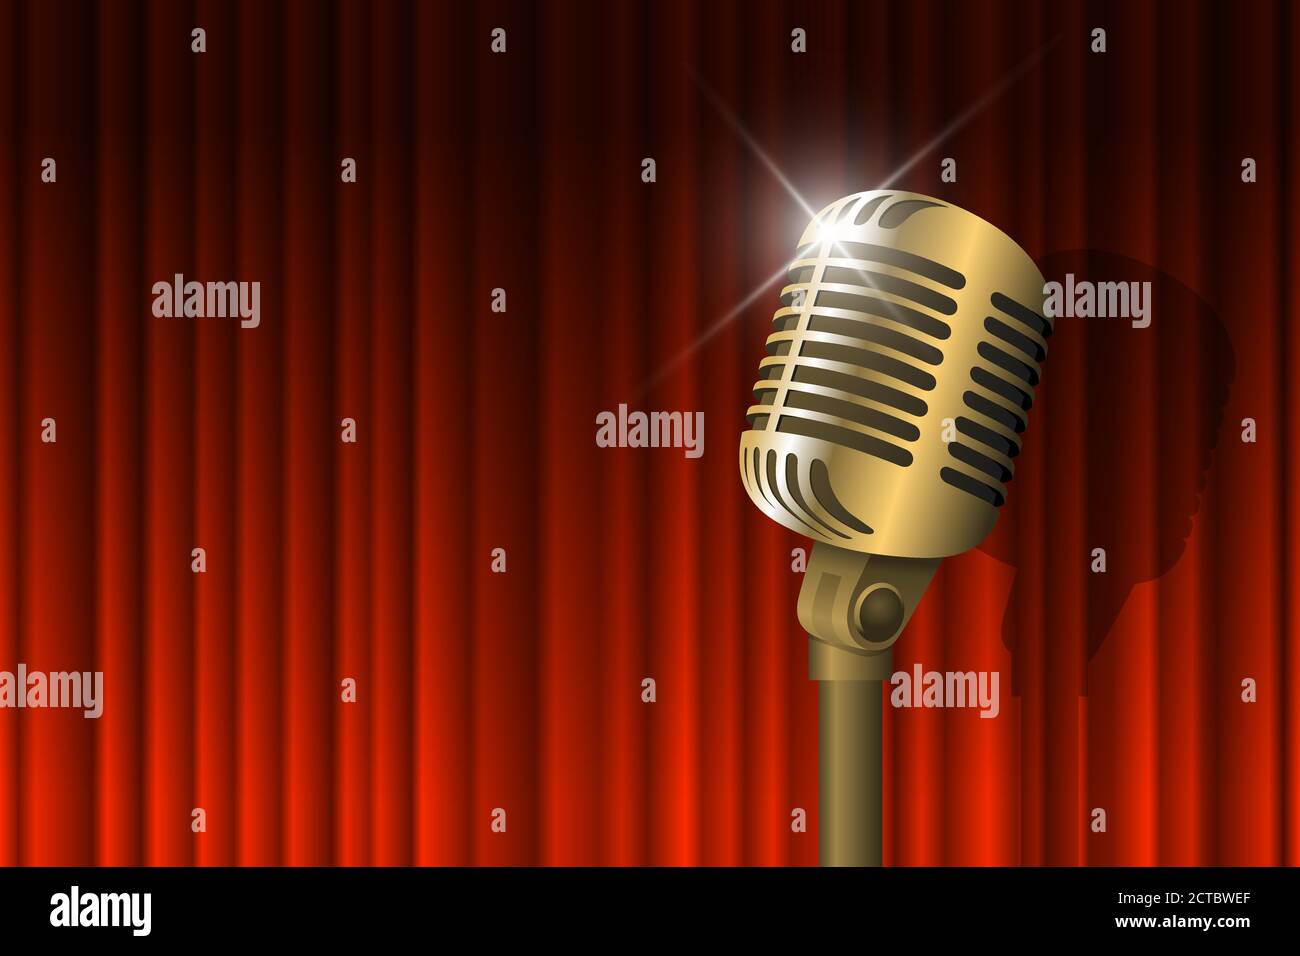 Gold vintage microphone illuminated and red curtain background. Retro music concept. Mic on empty theatre stage. Stand up comedy night show. Karaoke party vector eps art illustration Stock Vector